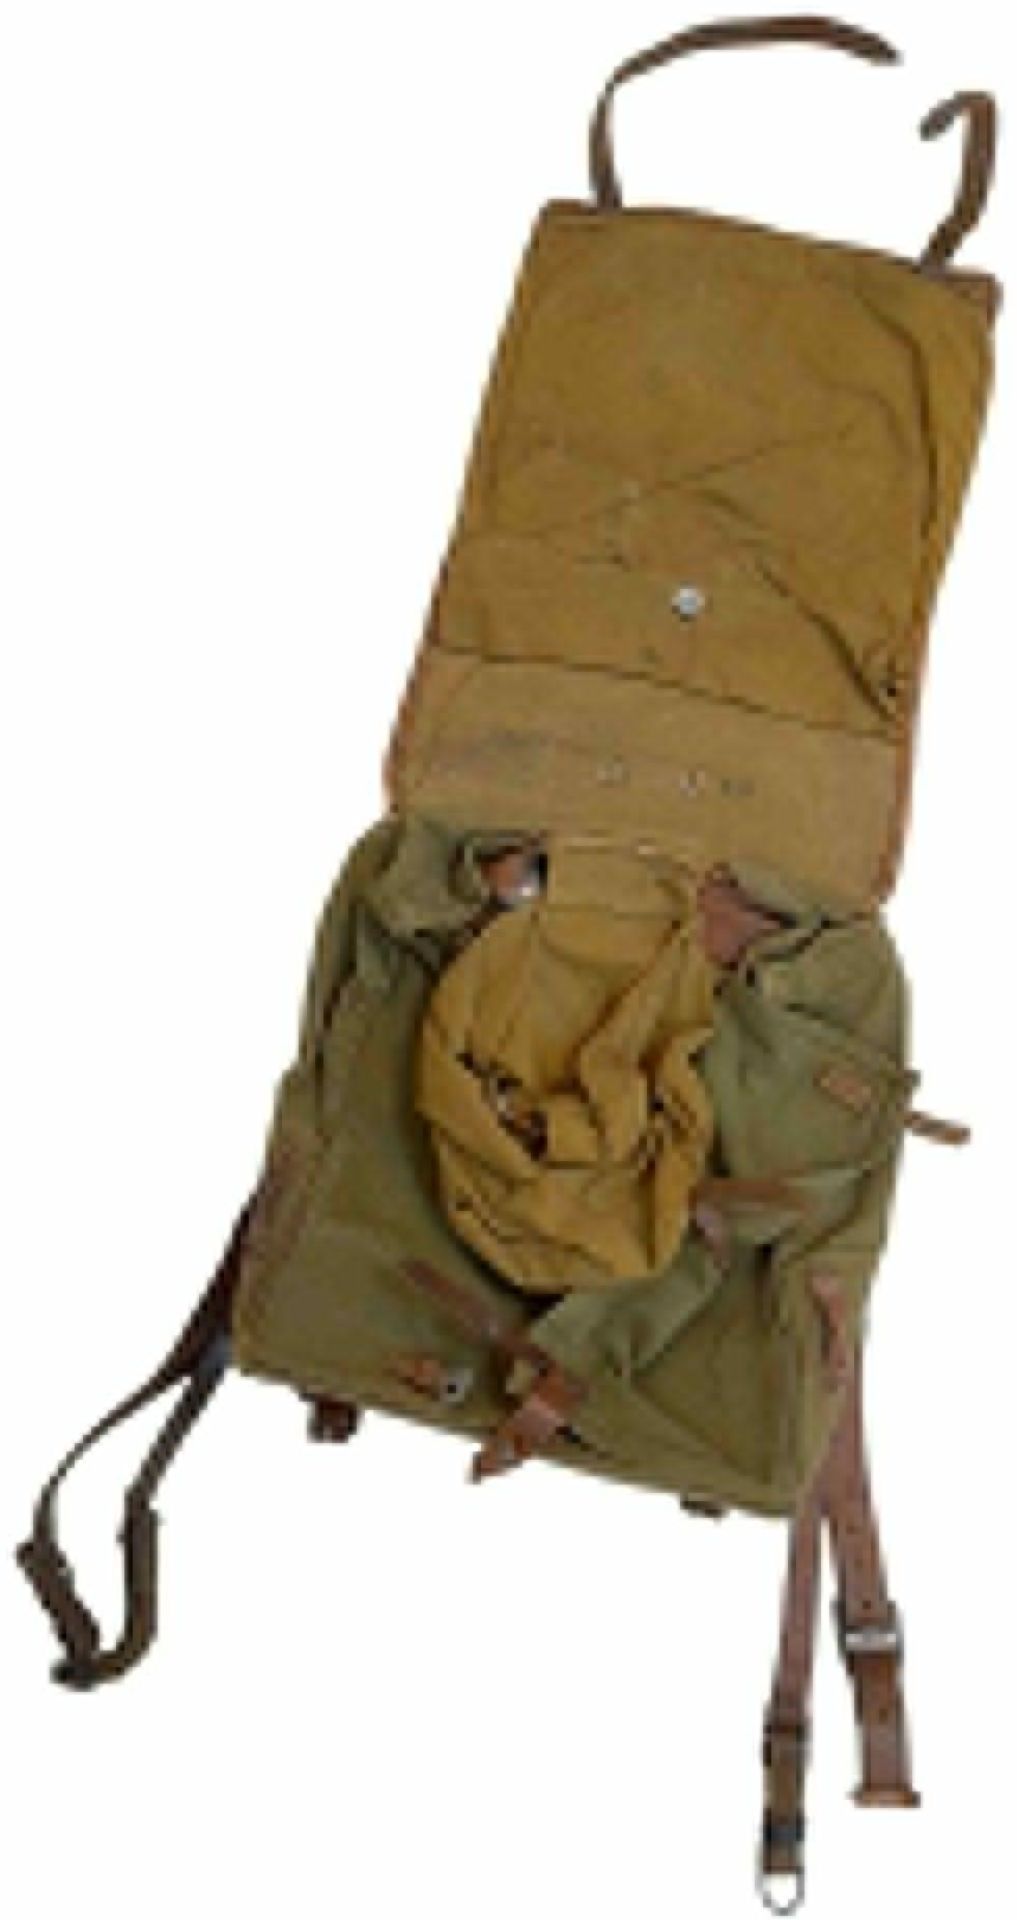 WW2 German Tournister “Pony Pack” Dated 1939. Used by the Hitler Youth and ground troops. - Image 3 of 7